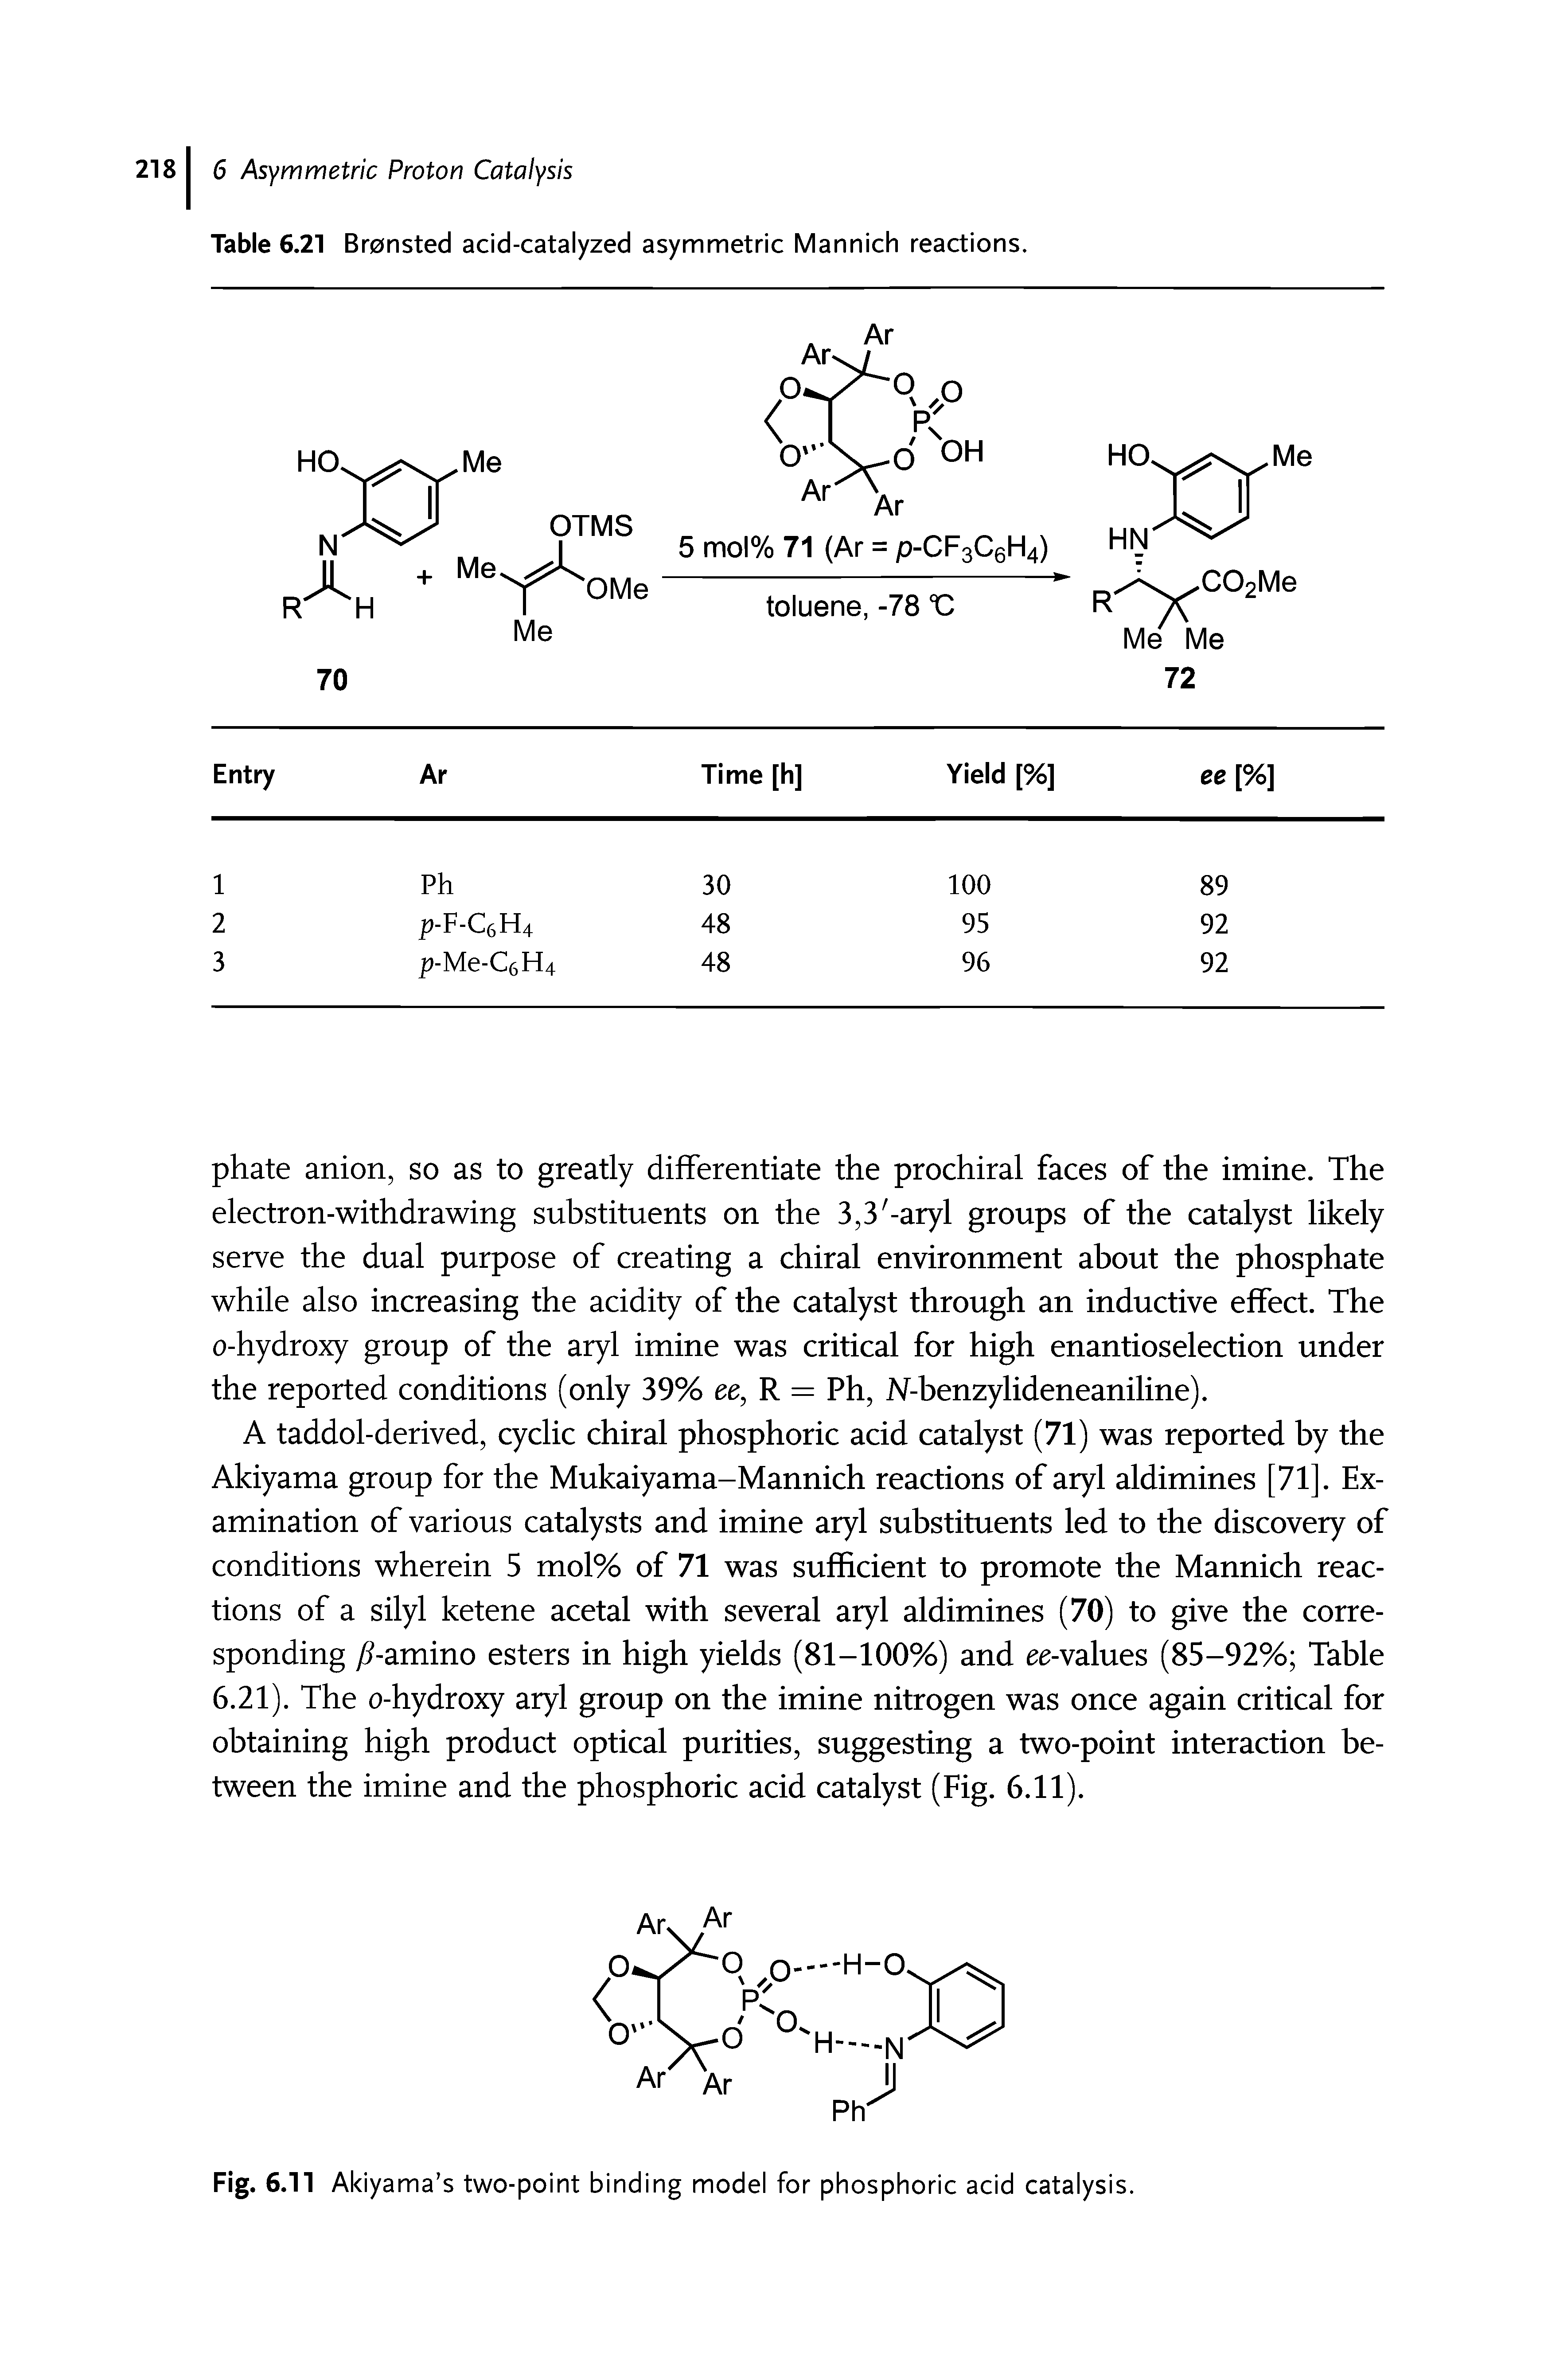 Table 6.21 Bronsted acid-catalyzed asymmetric Mannich reactions.